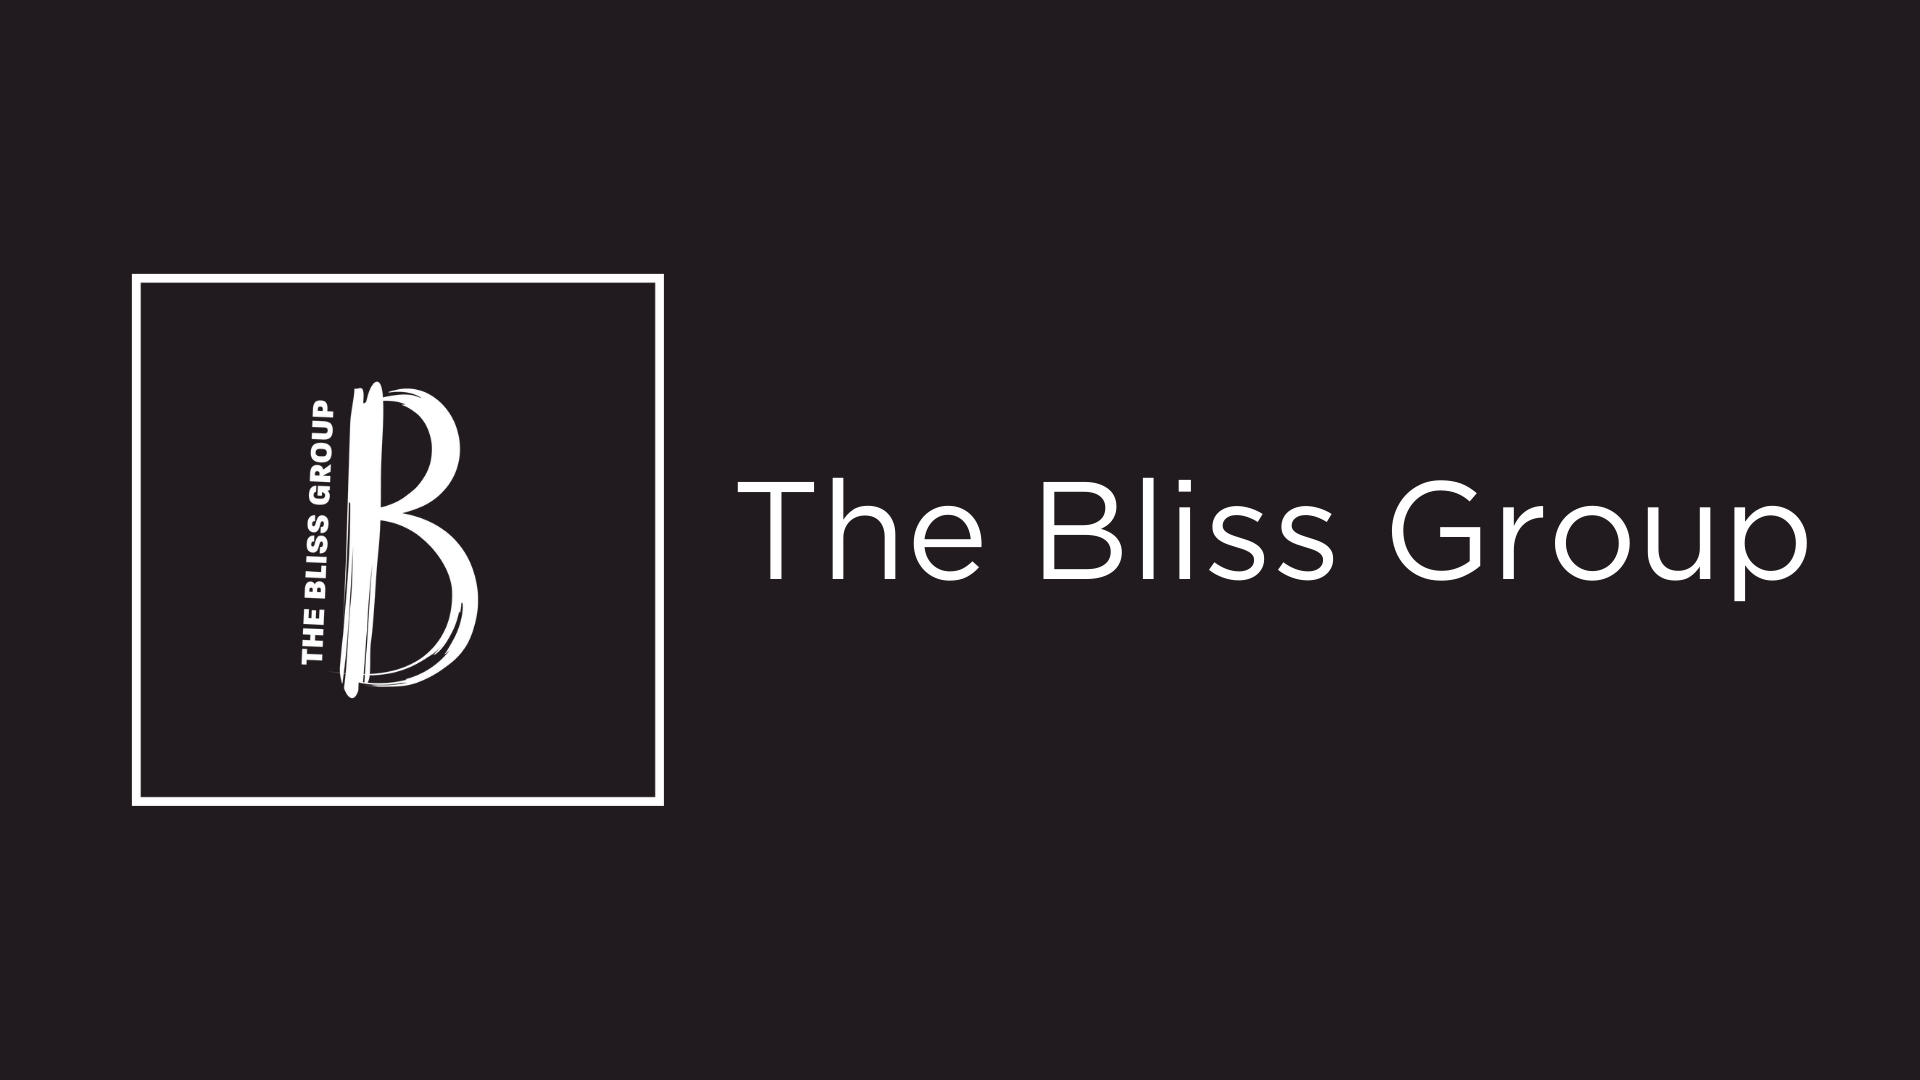 New B2B Intelligence Platform Launched by The Bliss Group and Ringer Sciences 1